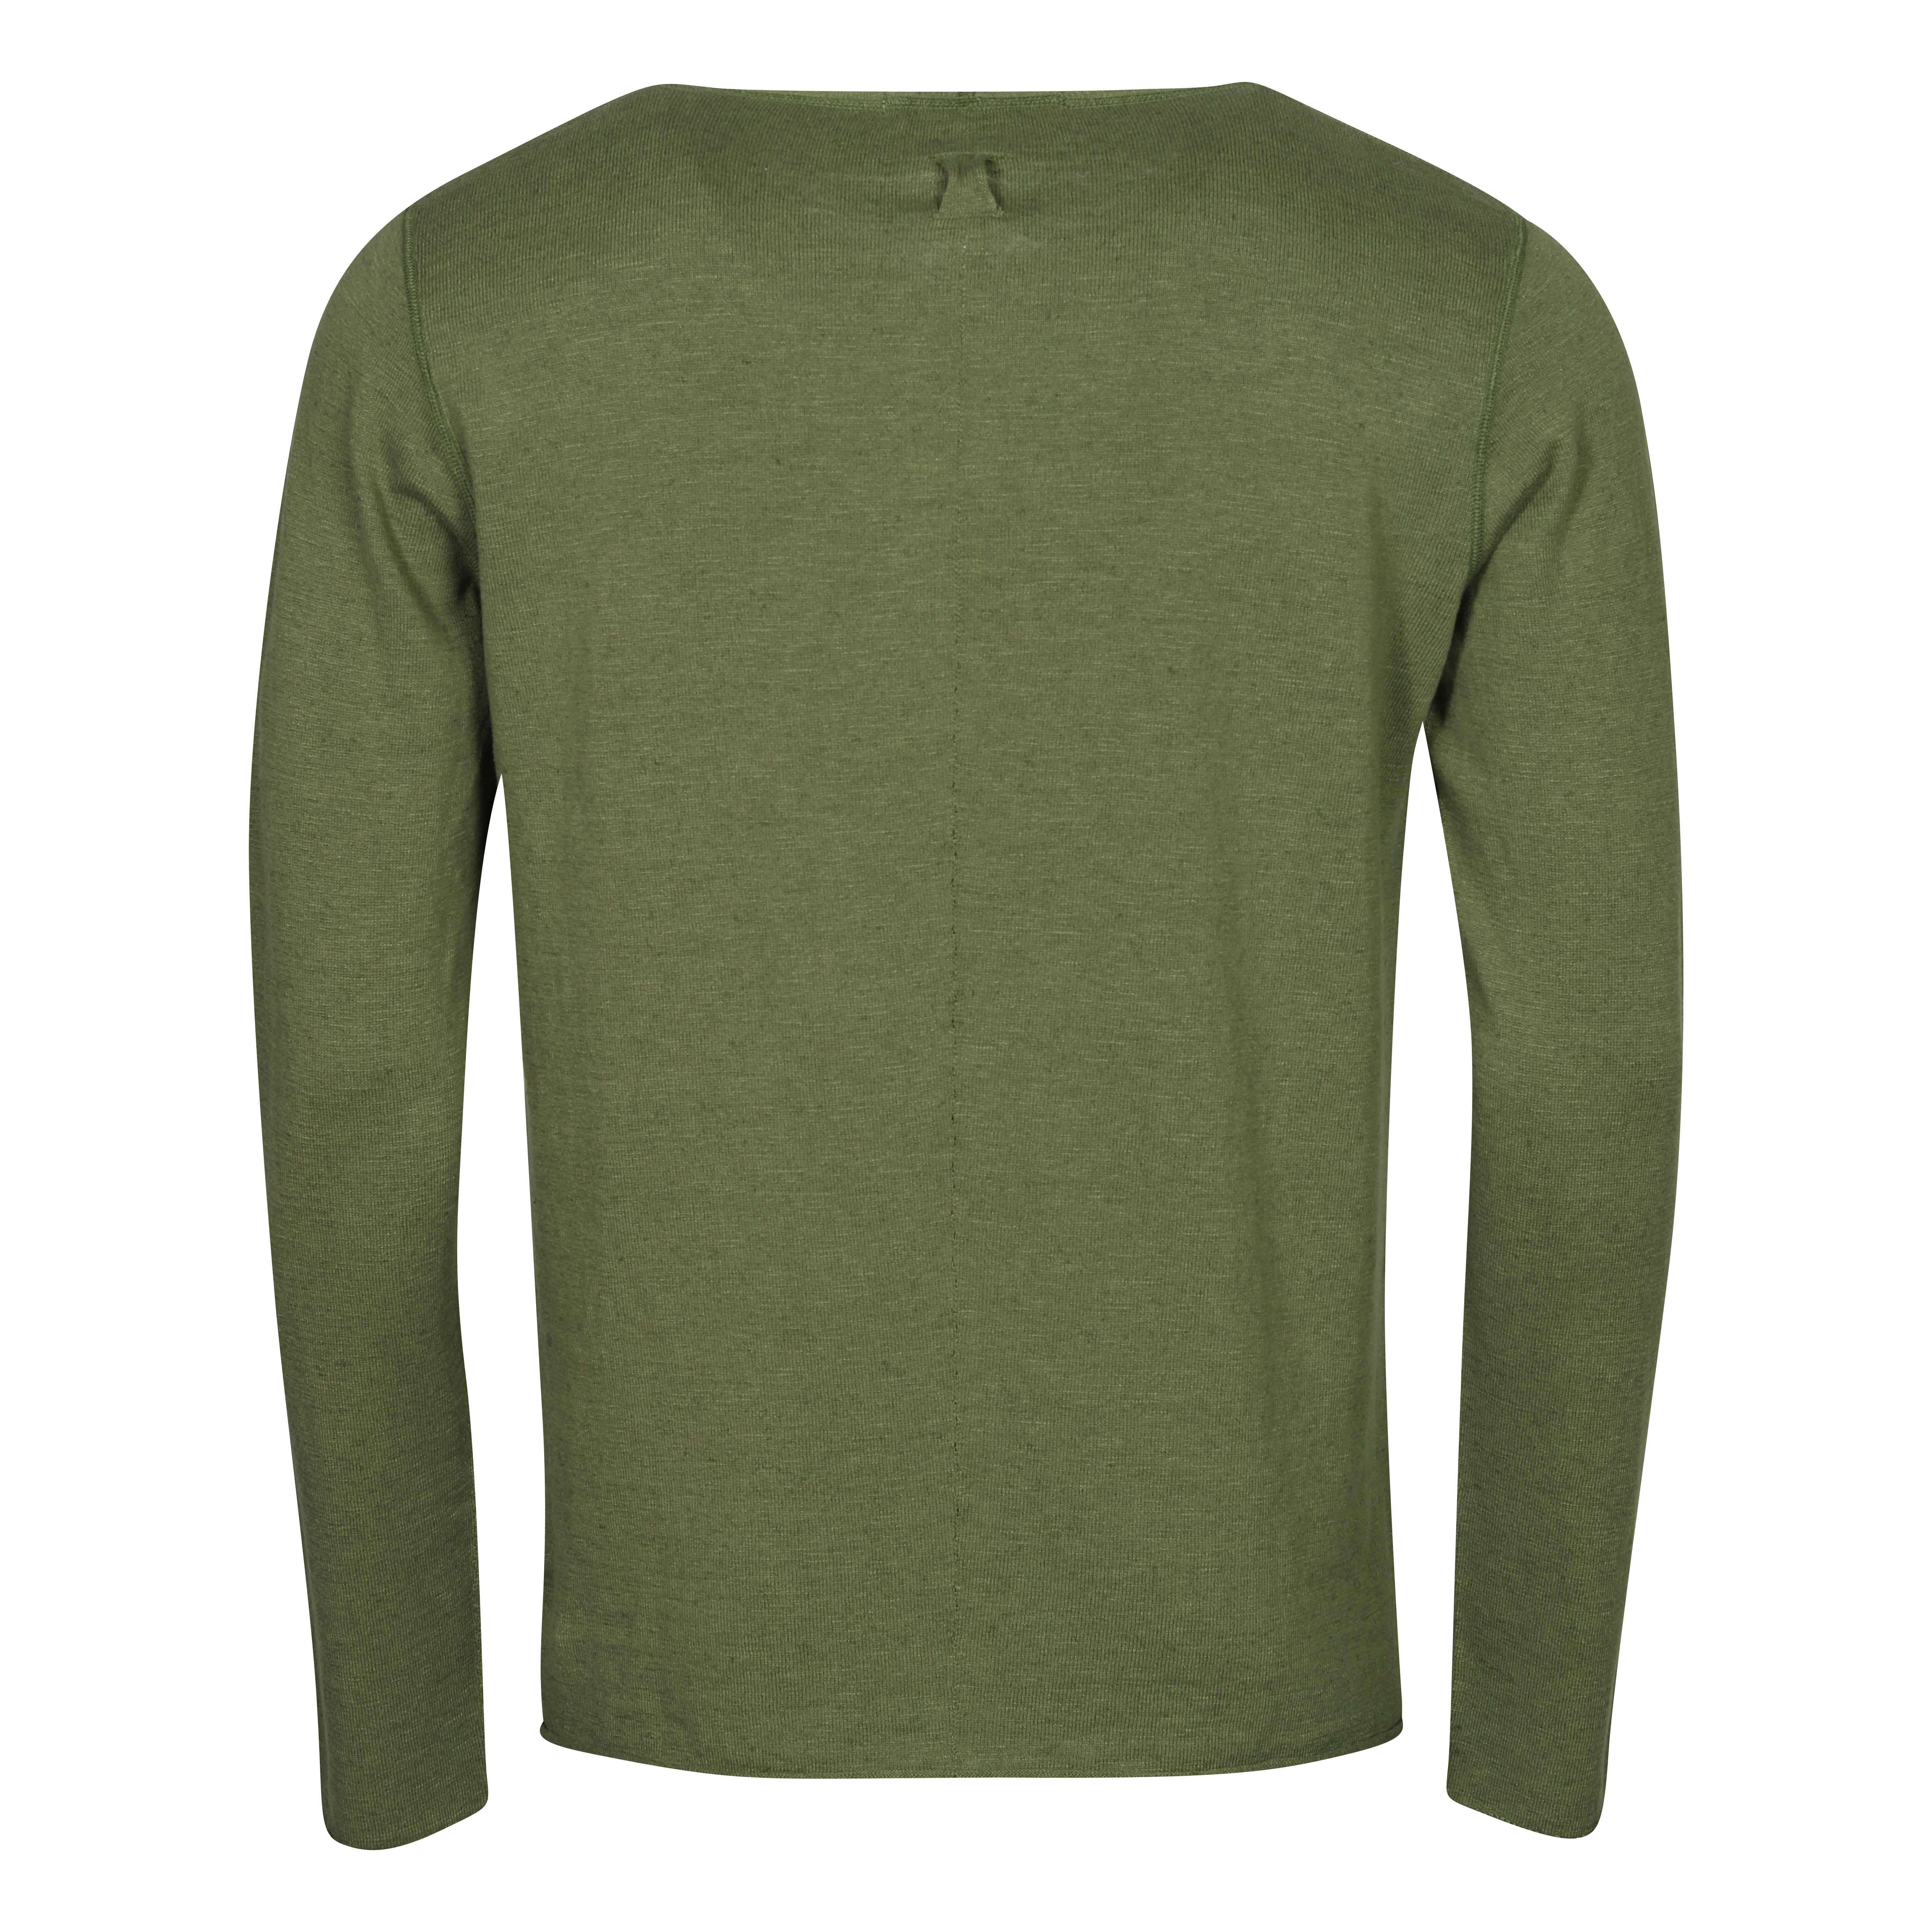 Hannes Roether V-Neck Knit Sweater in Pesto